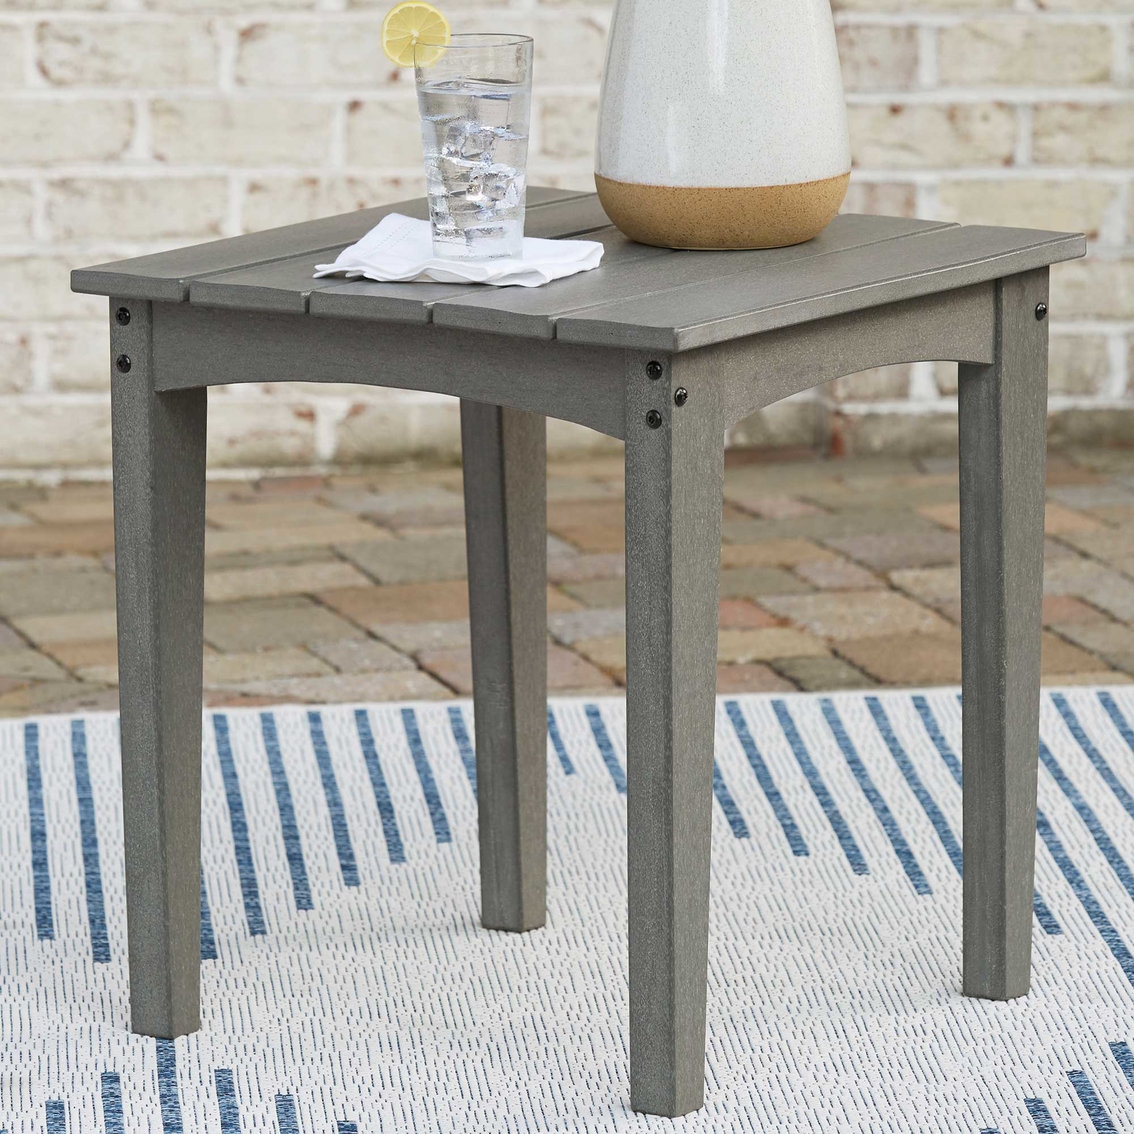 Signature Design by Ashley Visola Outdoor Square End Table - Image 2 of 5